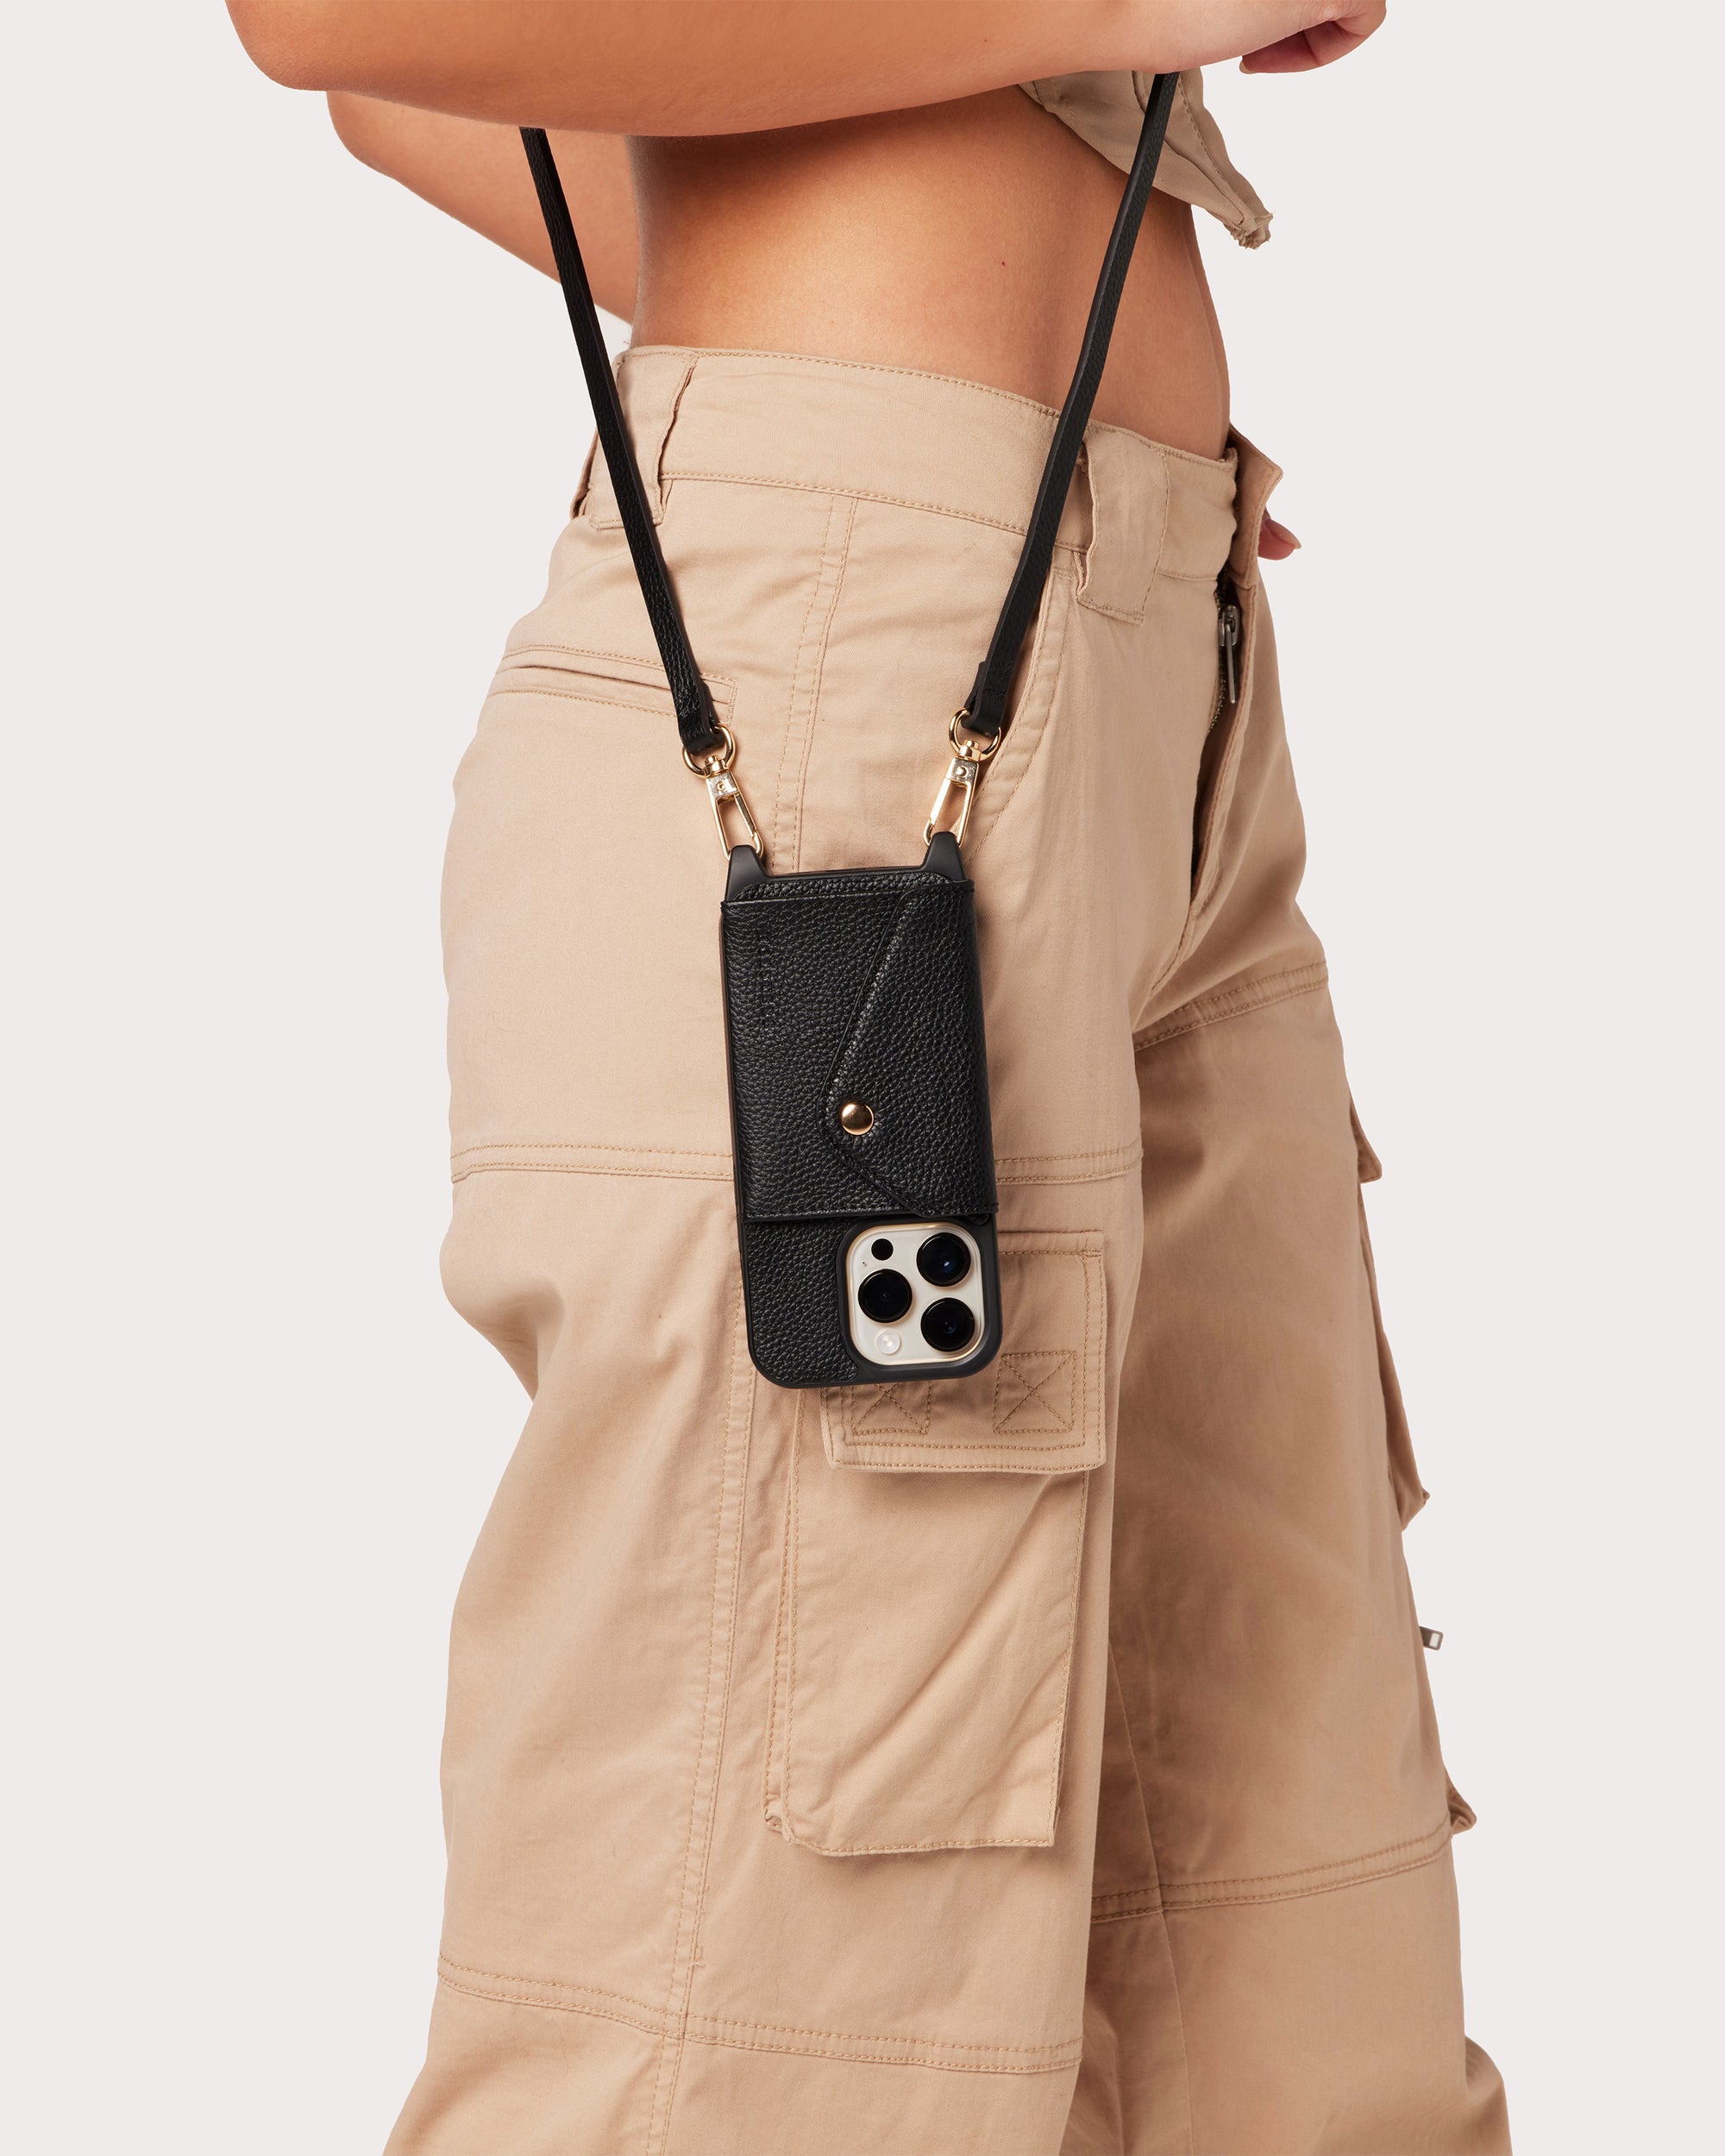 My Favorite $19 Amazon Purse Looks Like the $108 Crossbody Blake Lively  Wears on Repeat